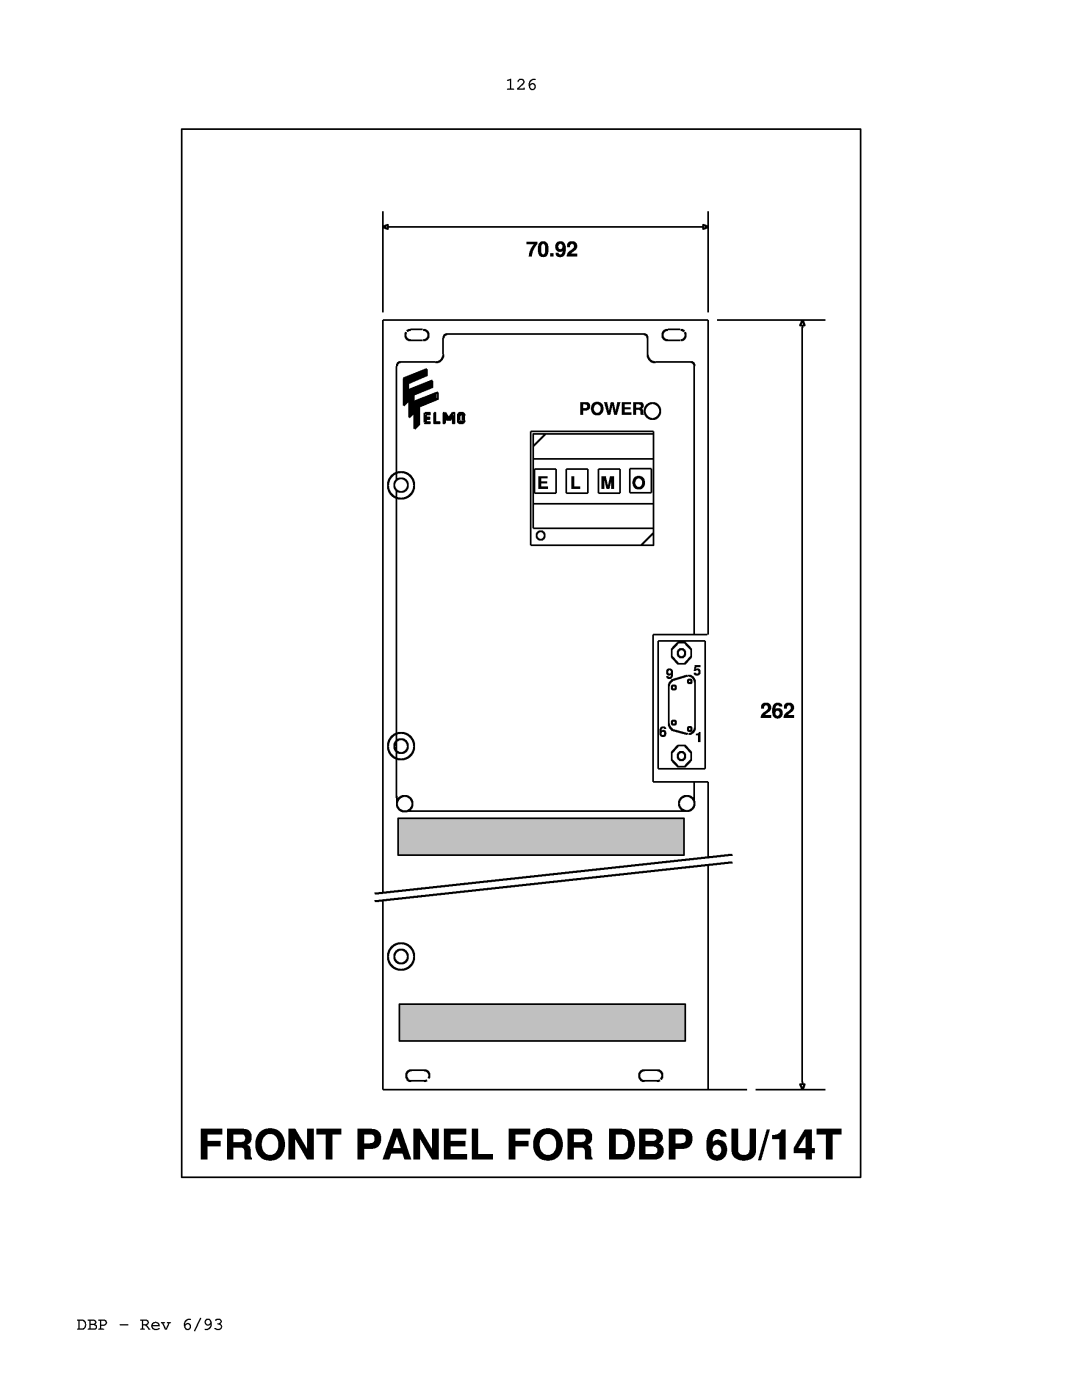 Elmo DBP SERIES manual FRONT PANEL FOR DBP 6U/14T, 70.92, Power 